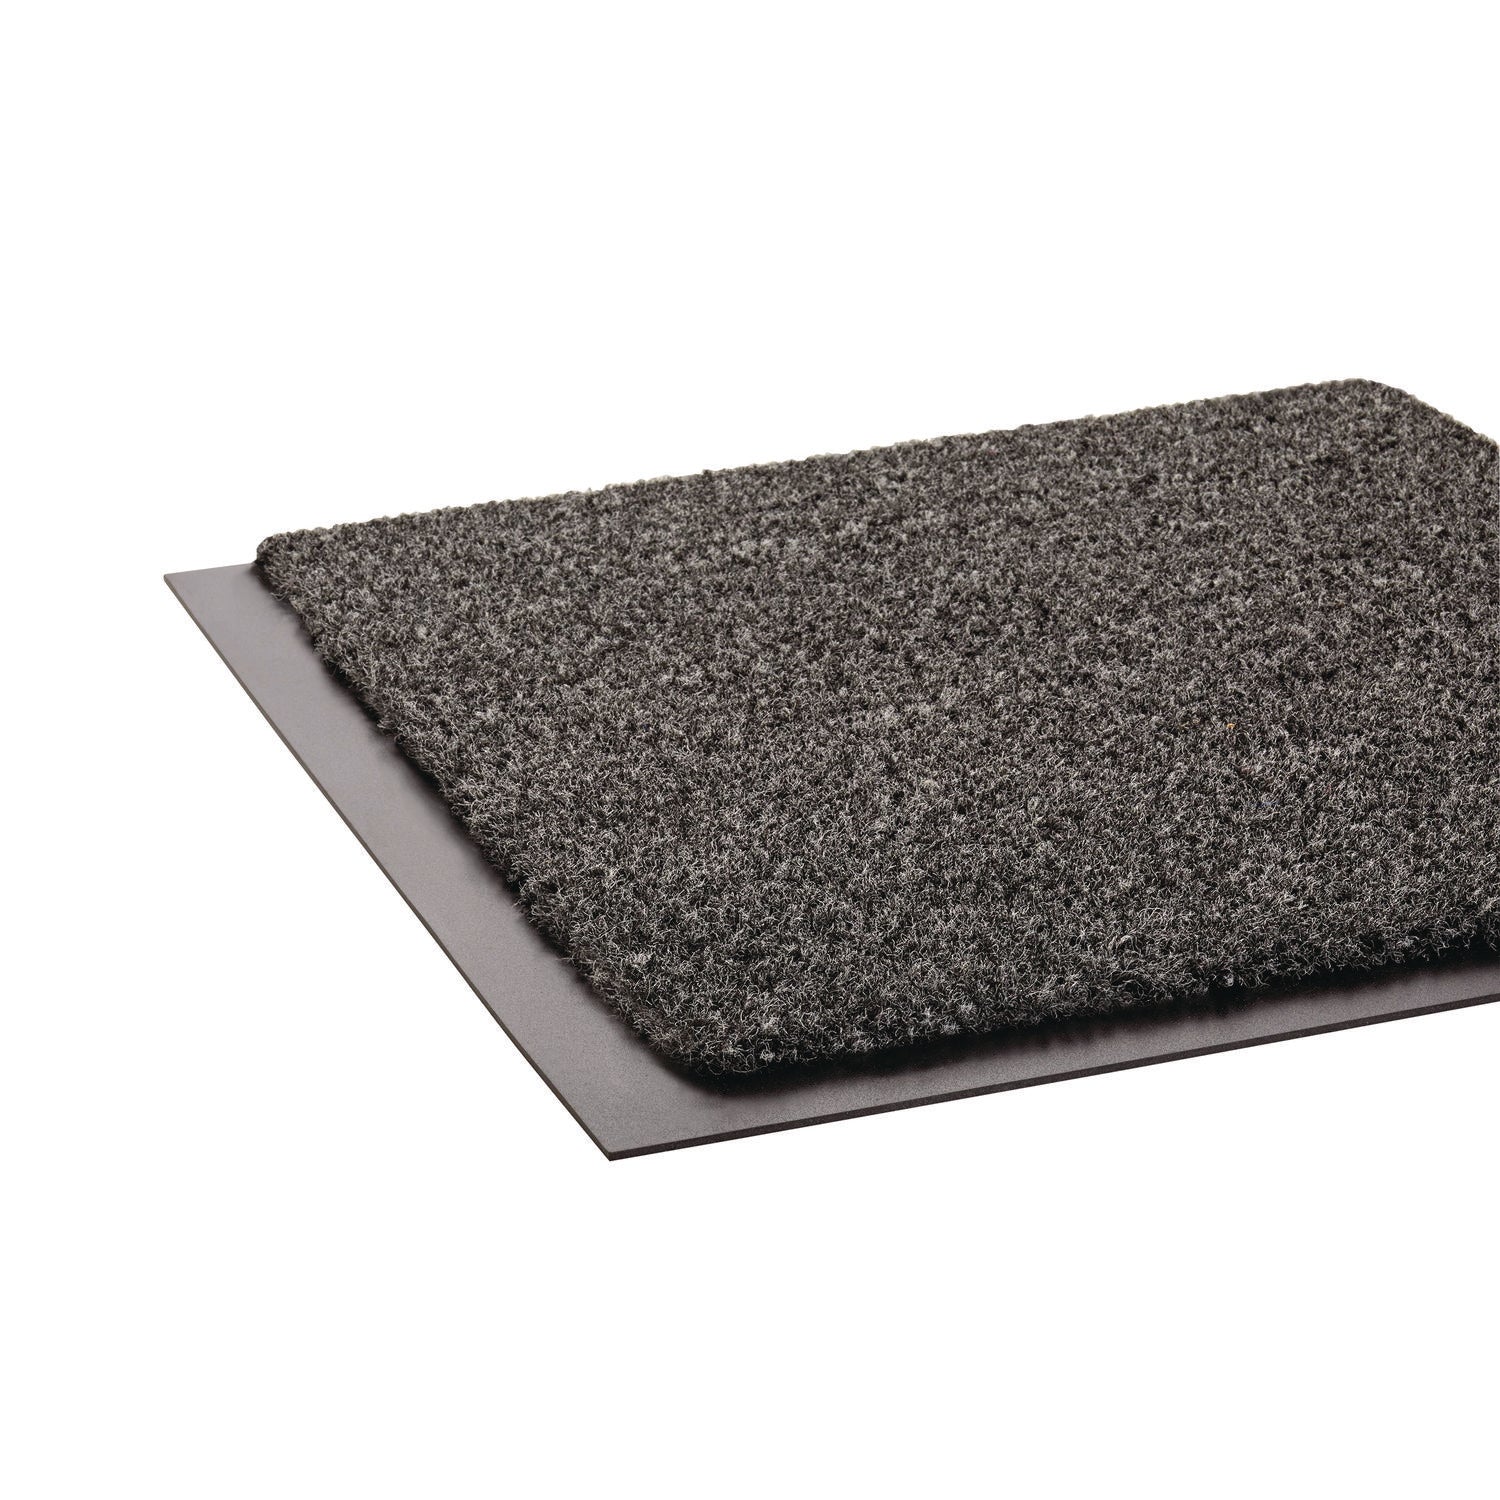 Rely-On Olefin Indoor Wiper Mat, 36 x 48, Charcoal - 3